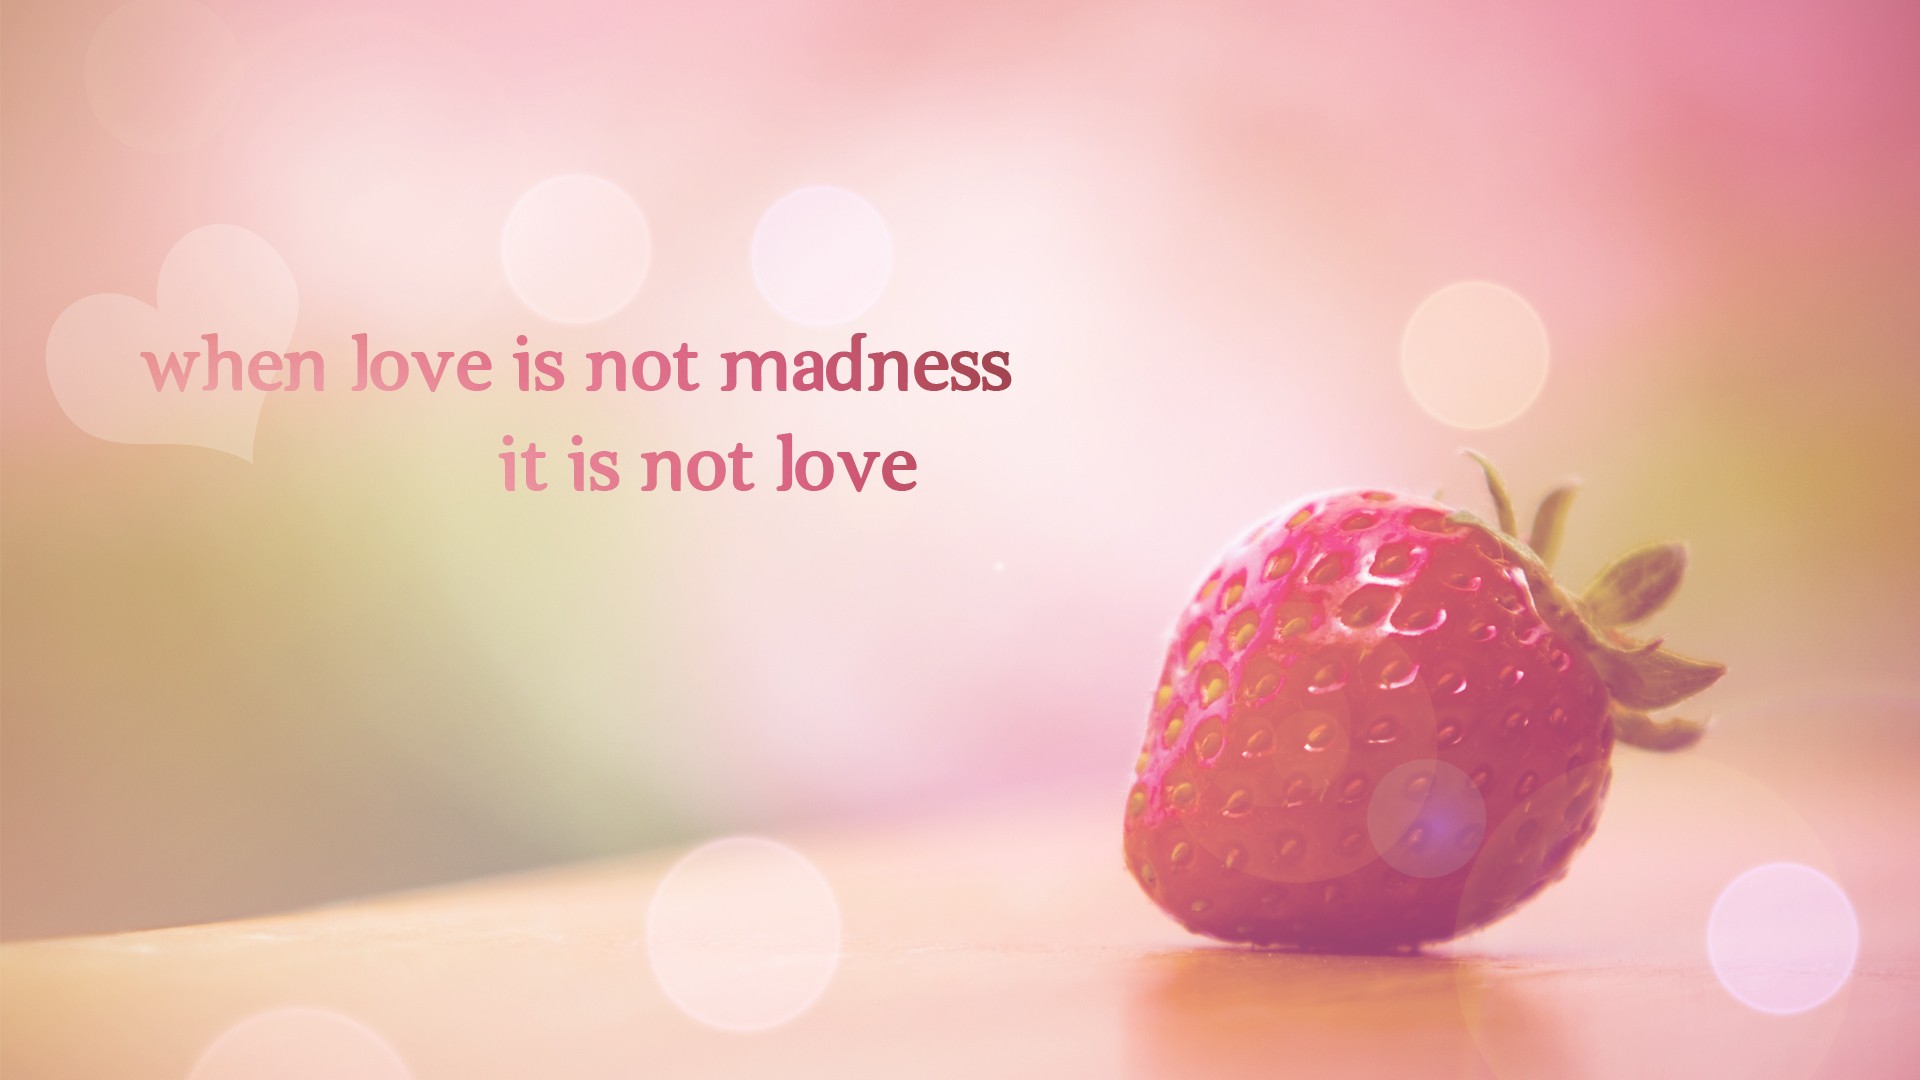 Free HD Wallpaper Images: Love Quotes Wallpaper Area